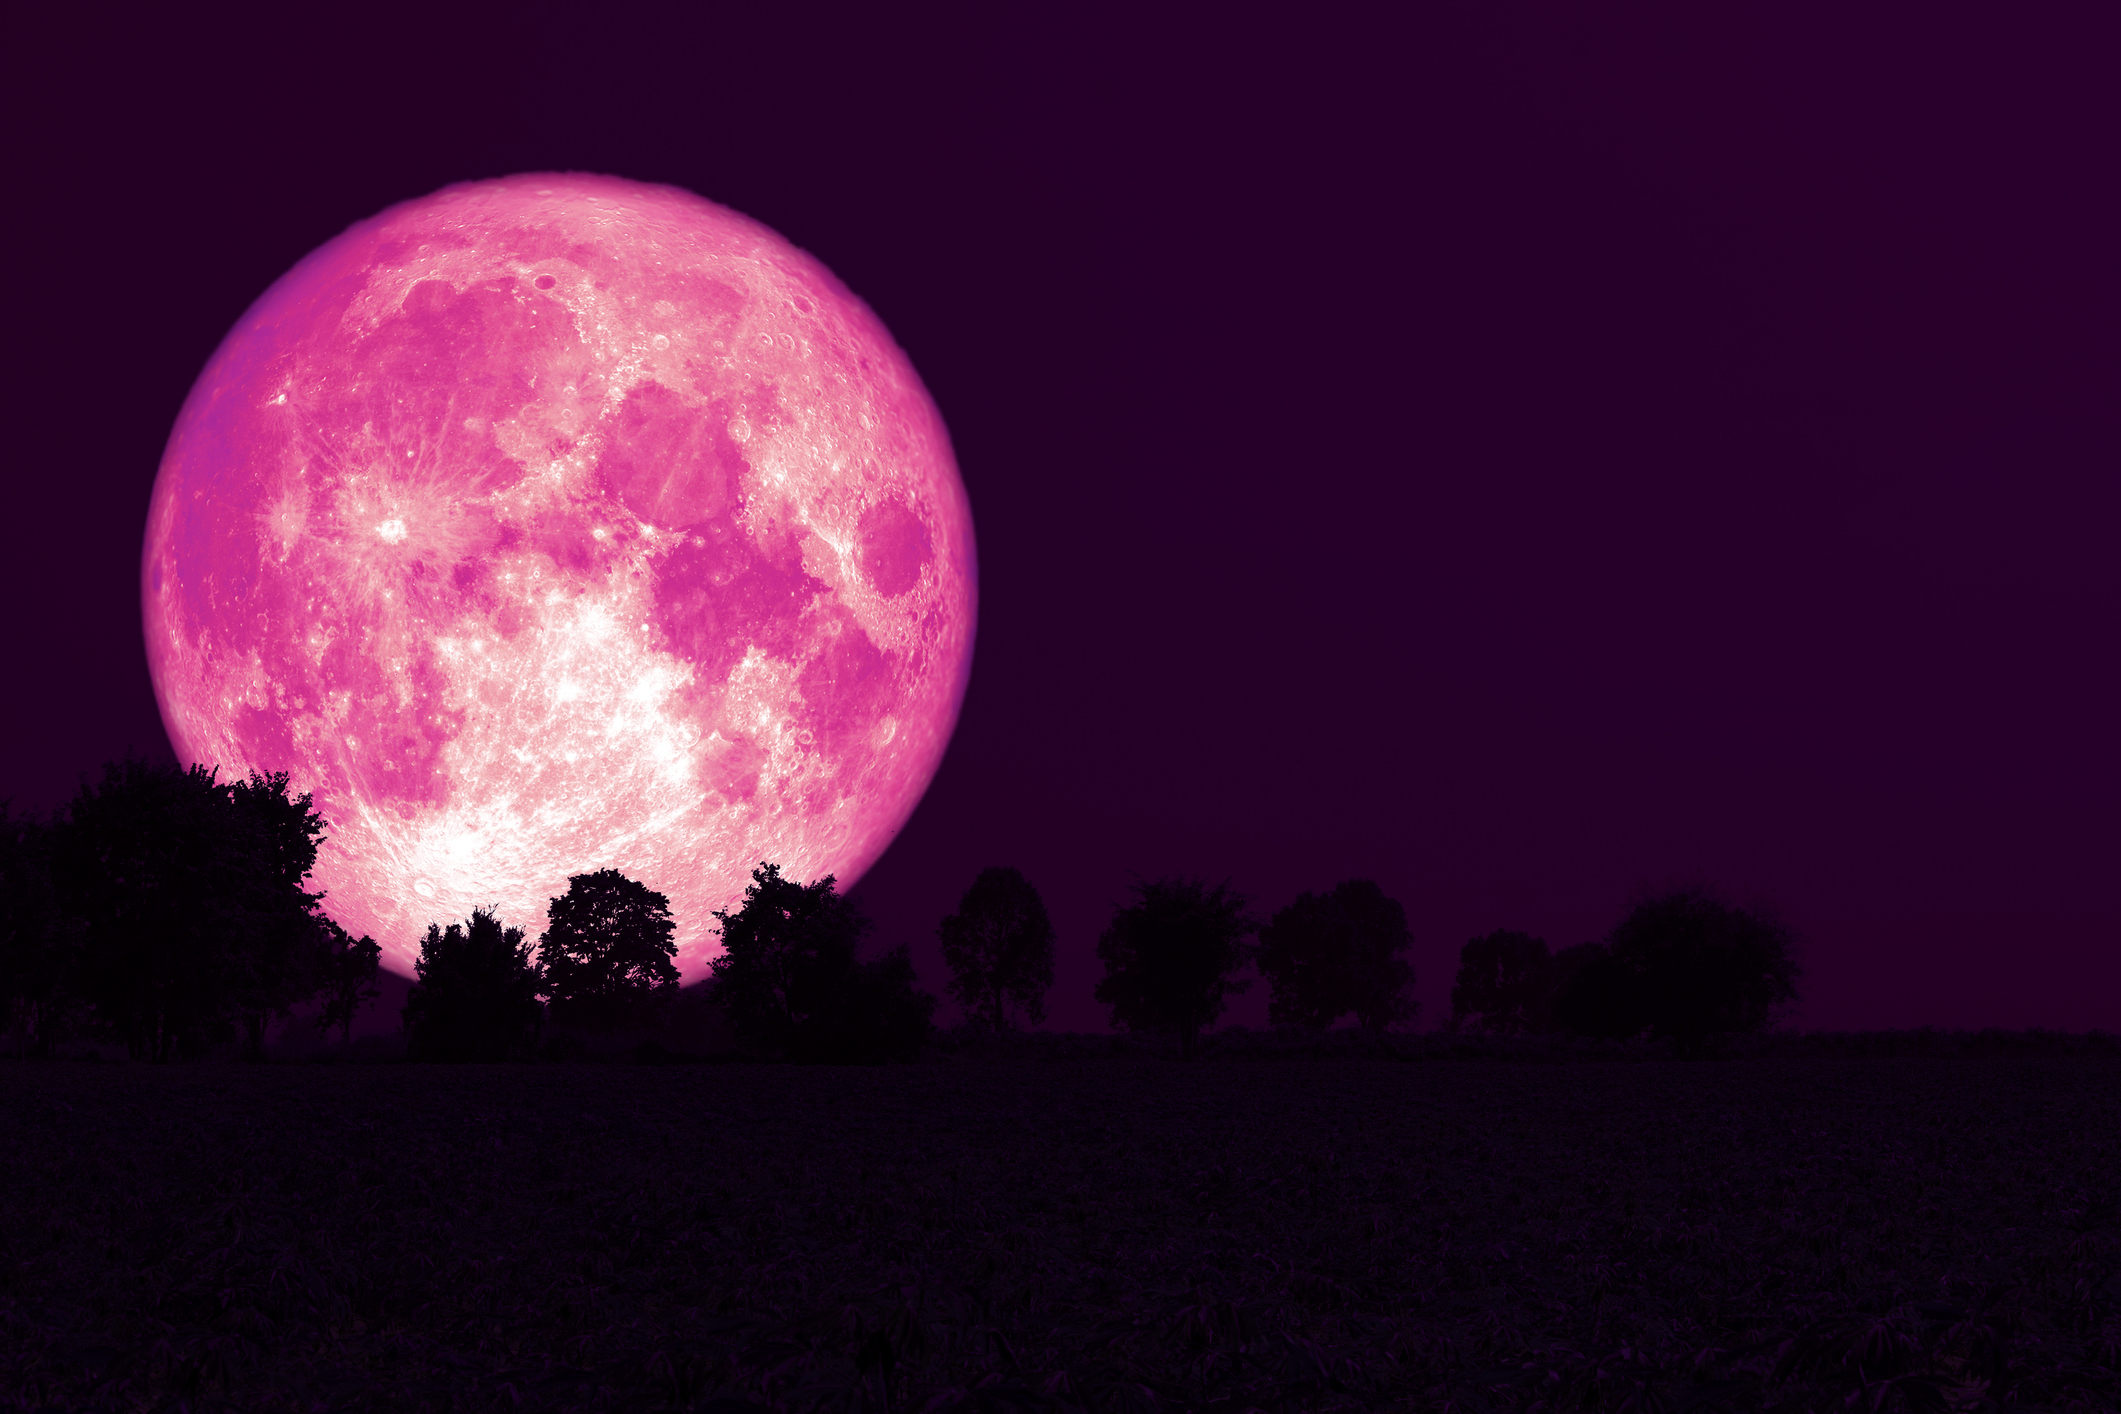 Don't Miss 2021's Last Super Moon: A Full Strawberry Moon Appears Soon